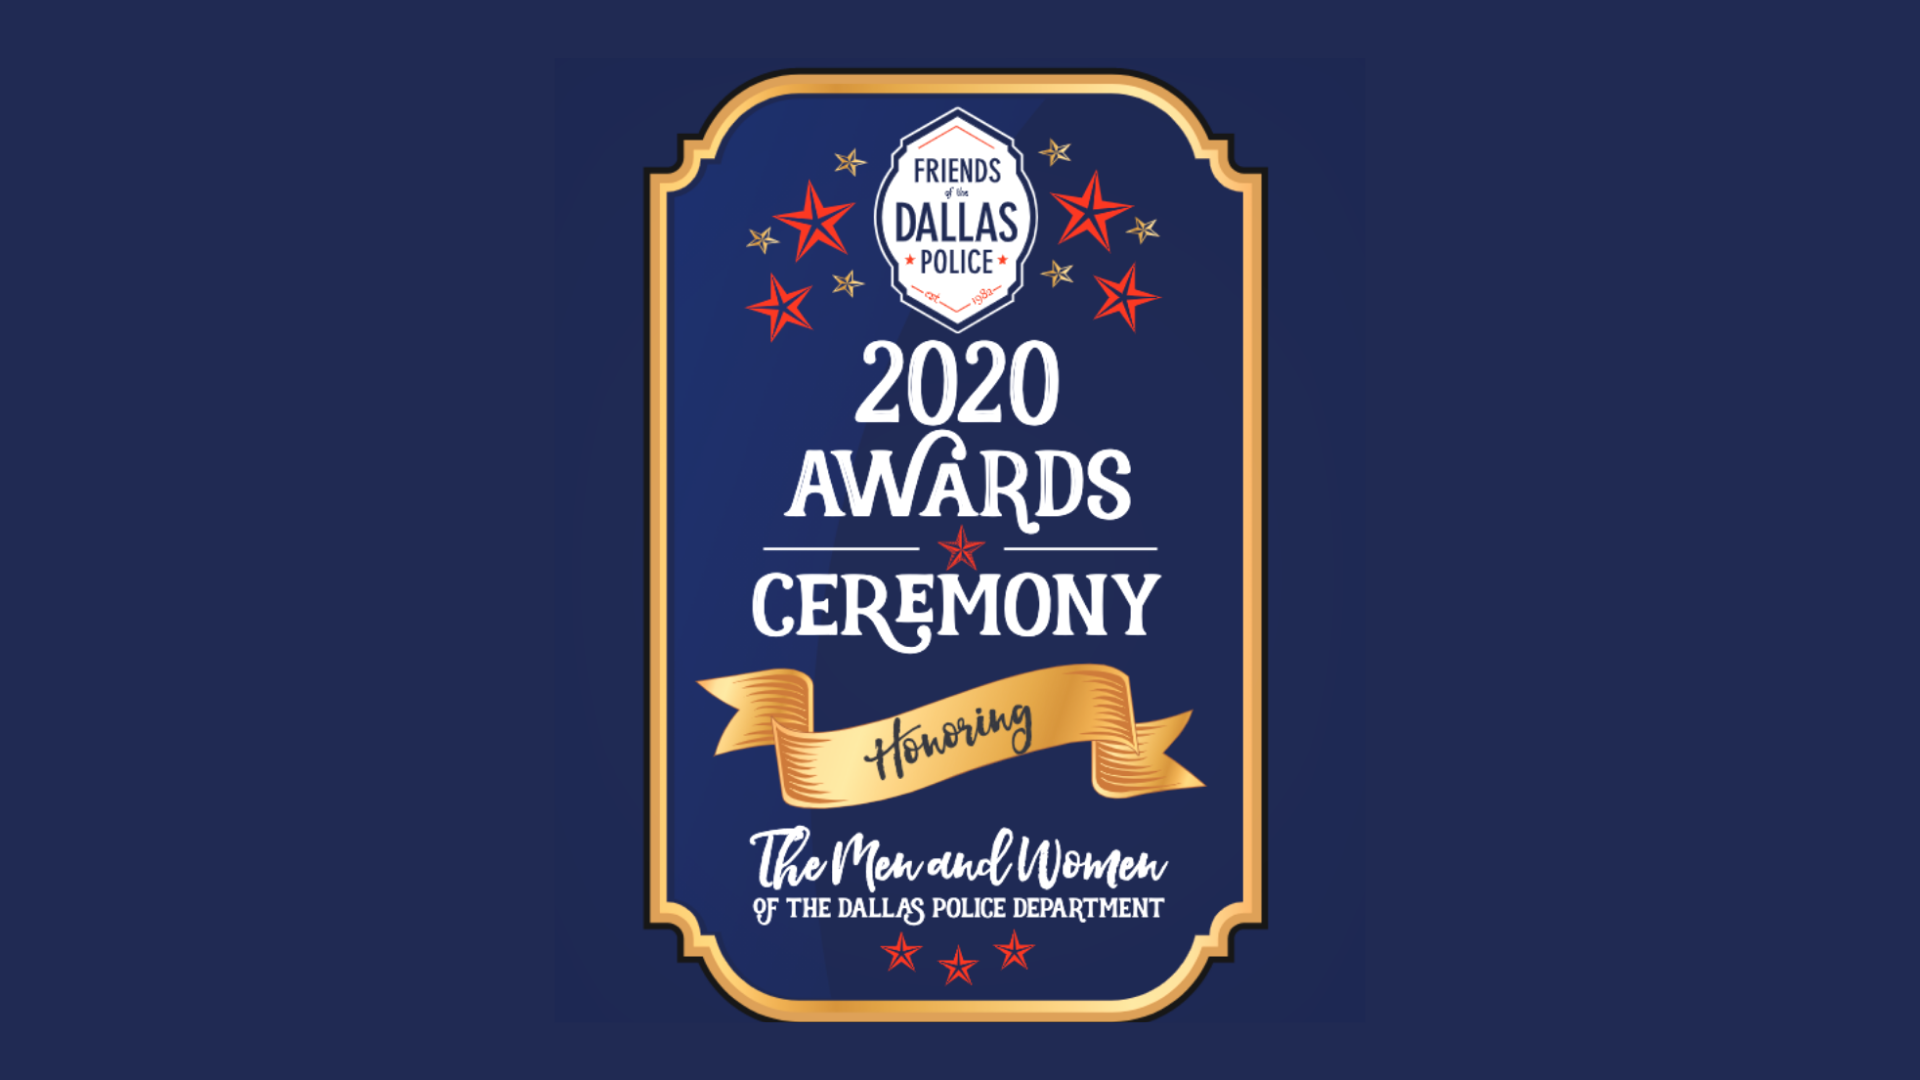 Friends of Dallas Police Awards Ceremony Honors 224 Outstanding DPD Officers and Employees Via Virtual Live Stream Event